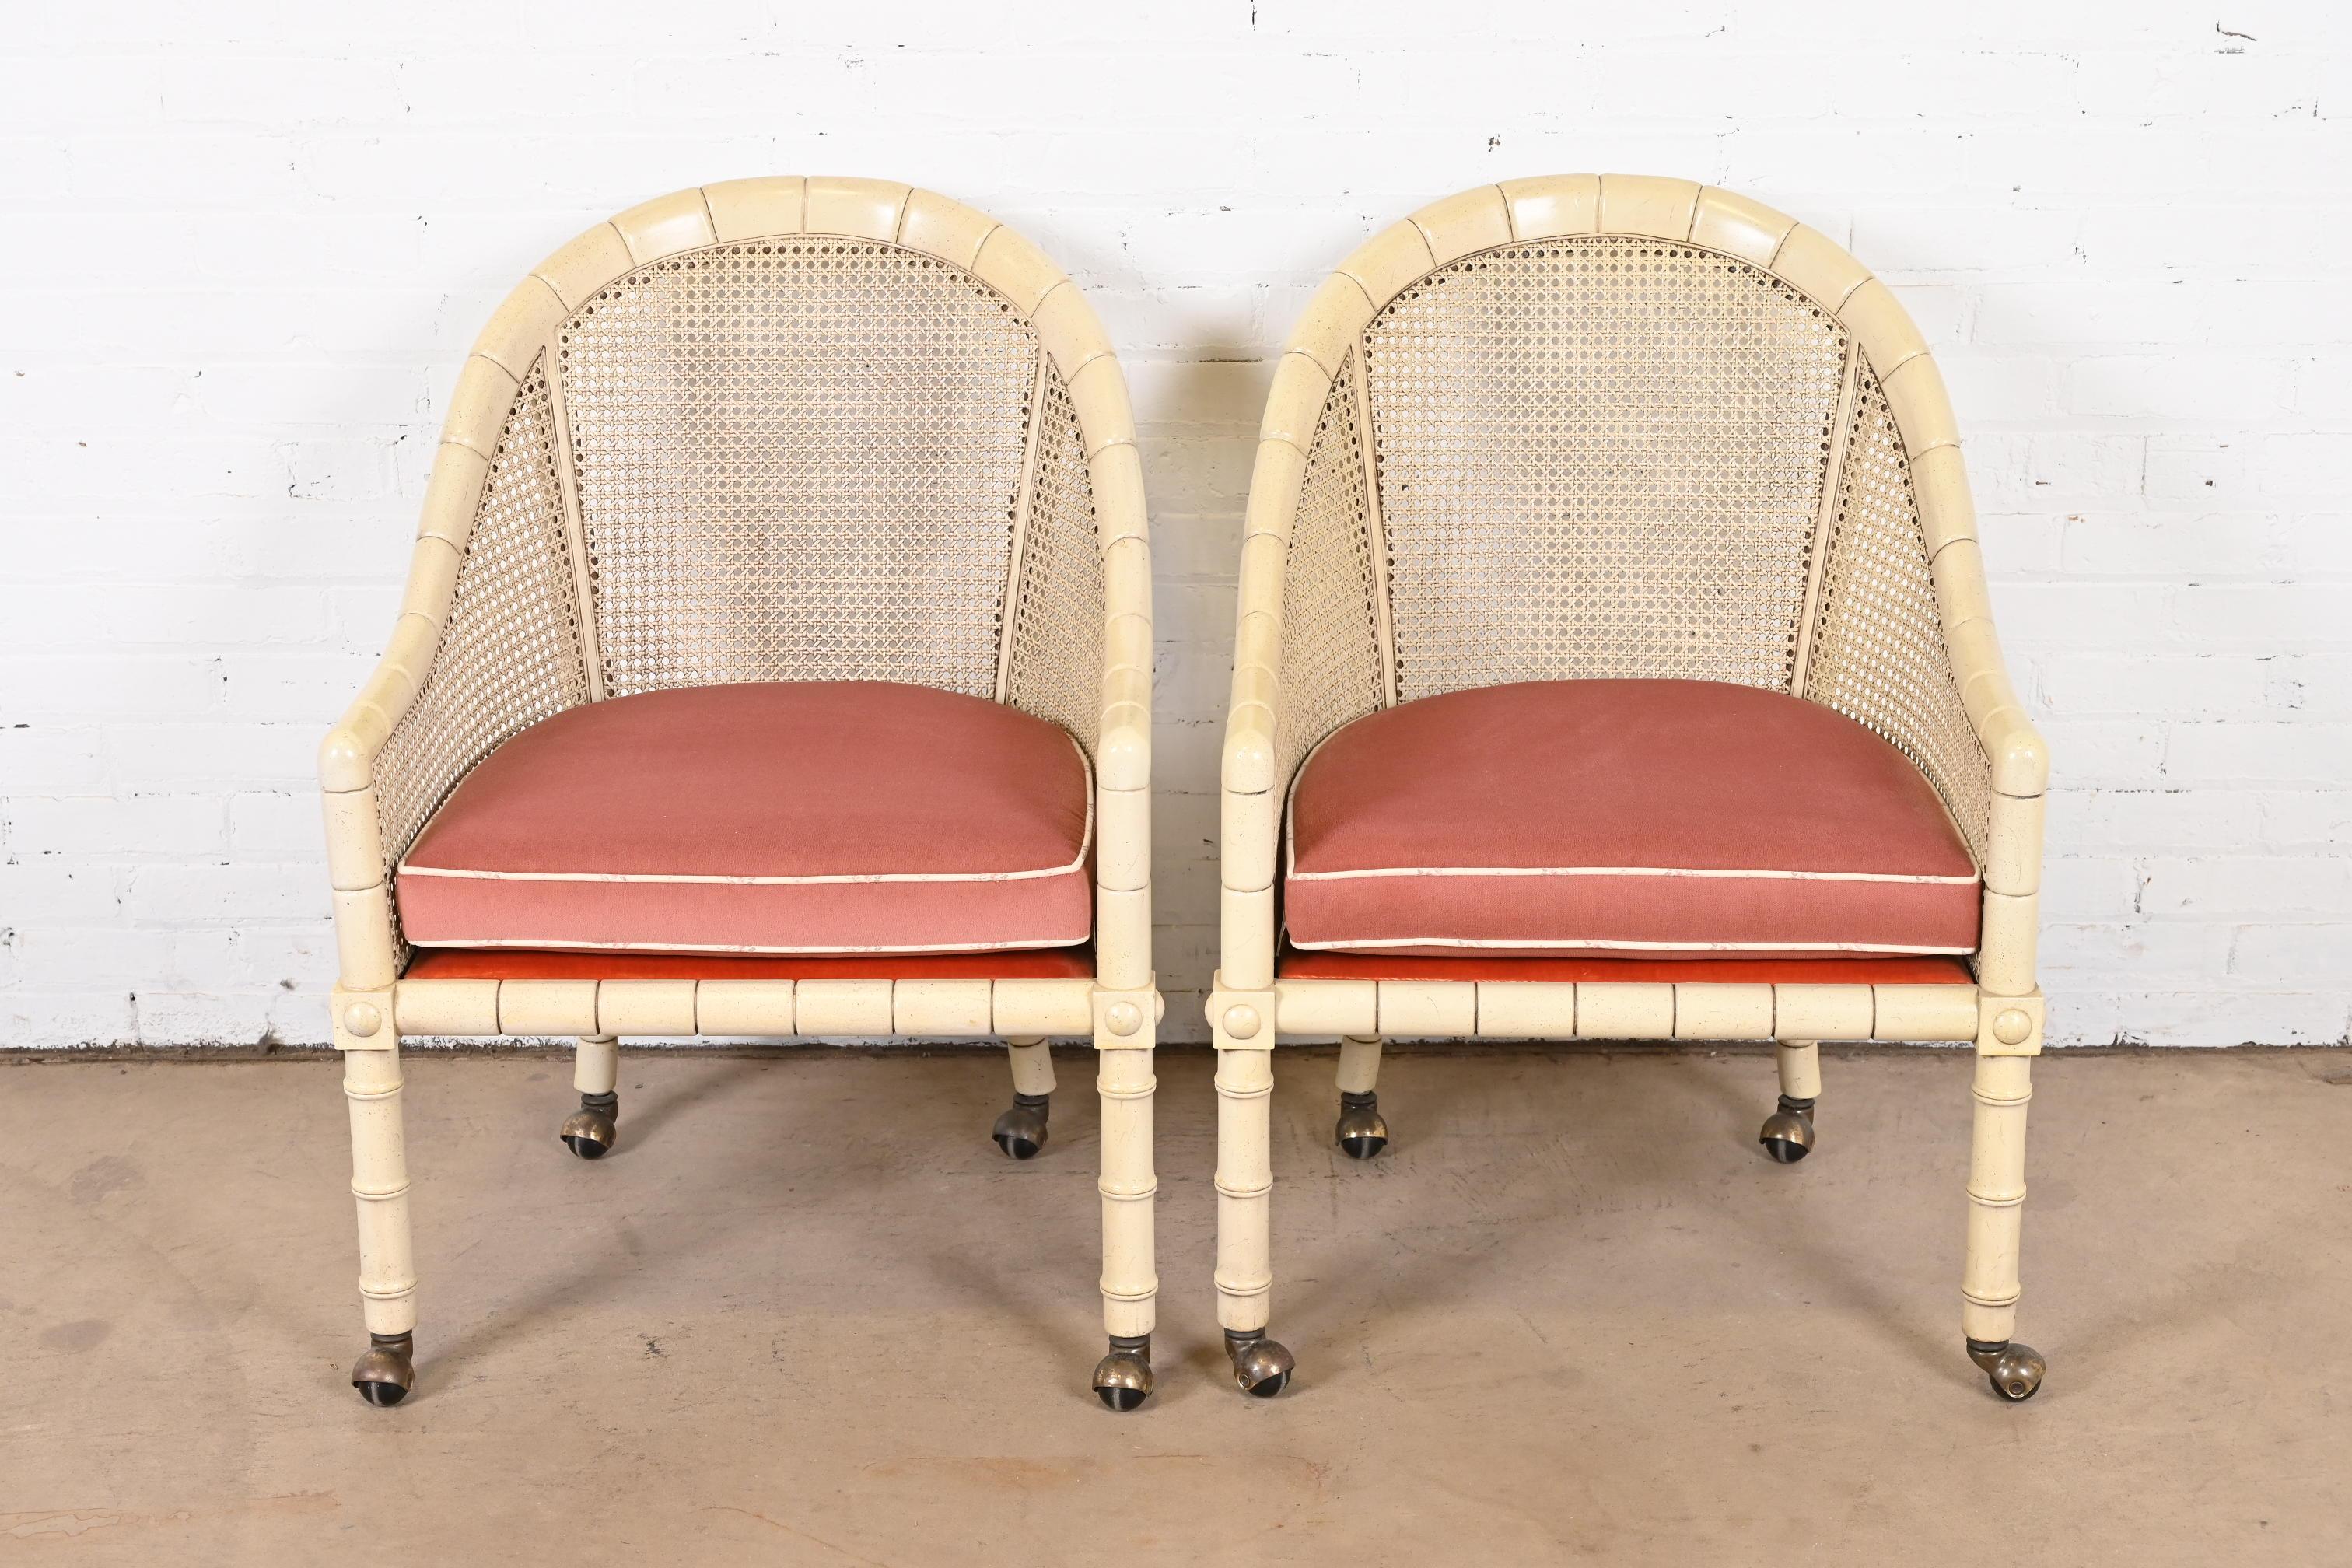 American John Widdicomb Regency Faux Bamboo and Cane Club Chairs, Pair